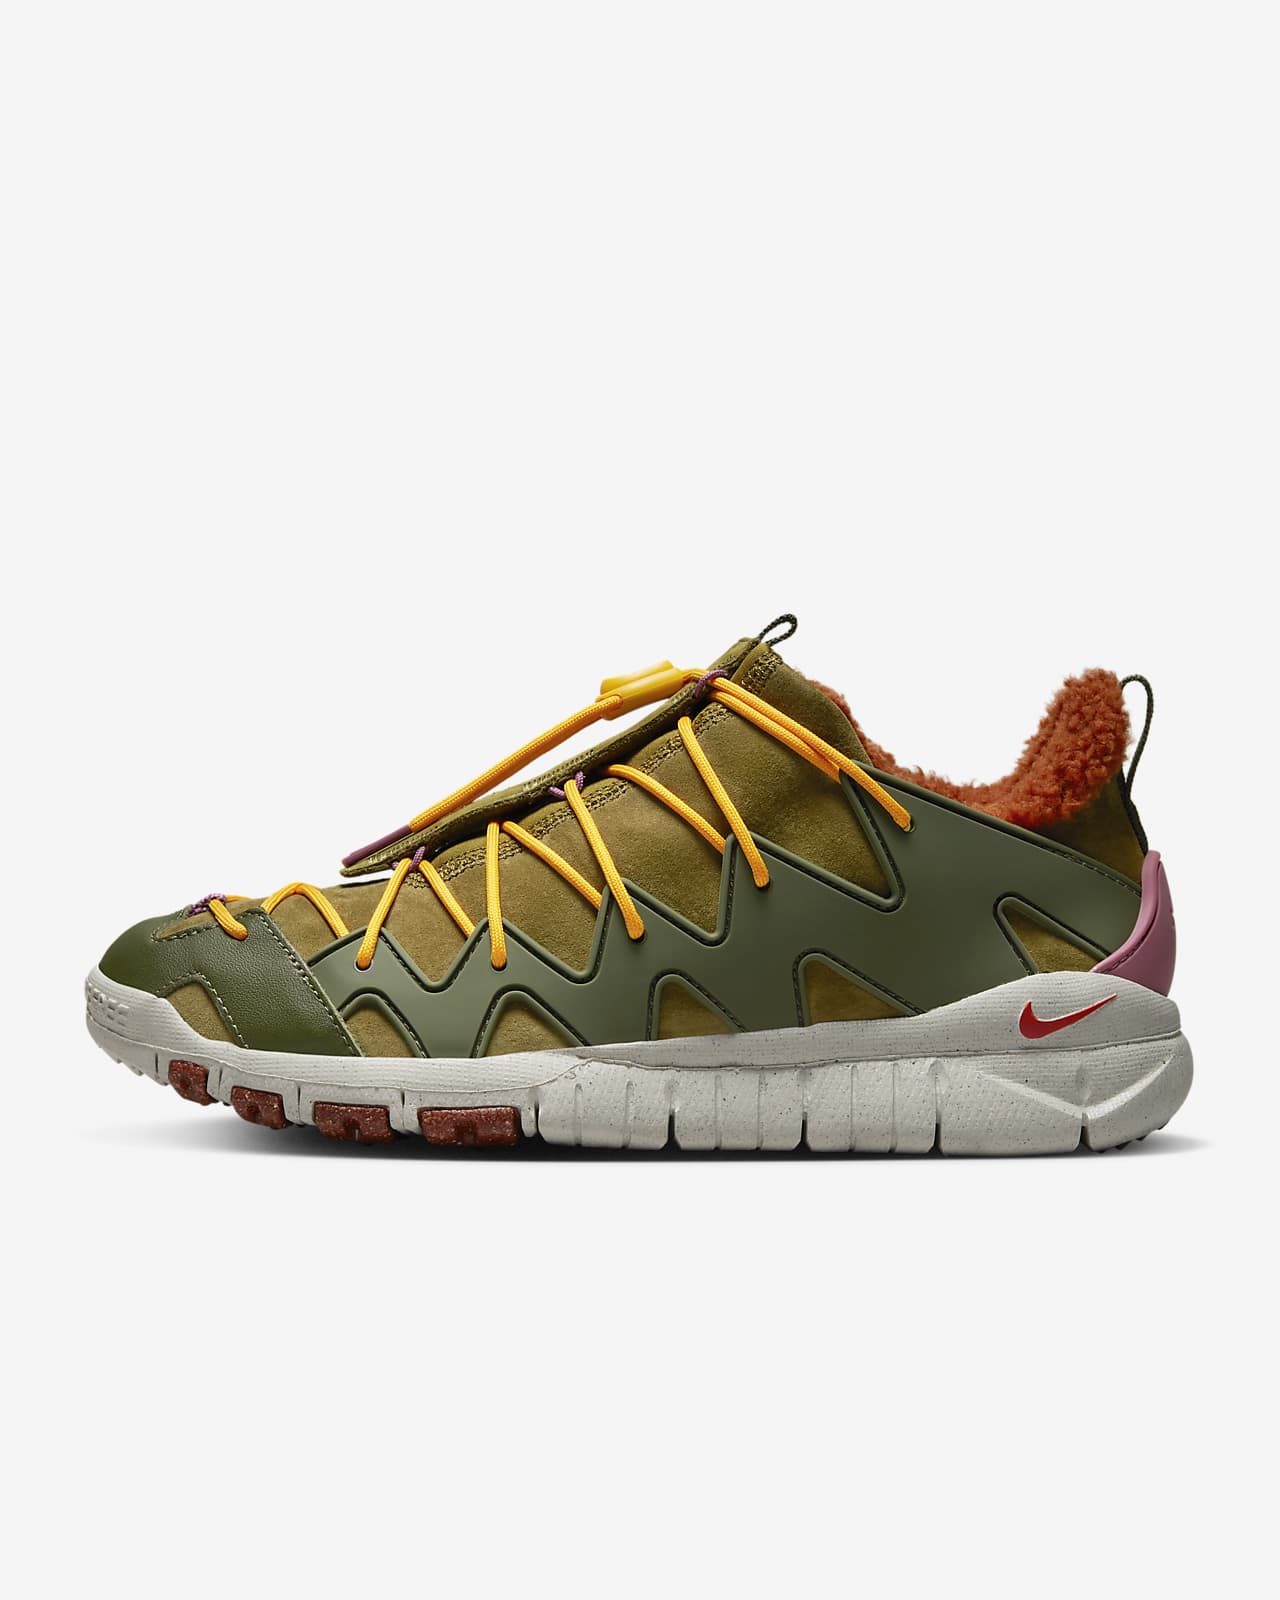 Viscous Speak loudly chilly Nike Free Crater Trail Boot N7 Men's Shoes. Nike.com